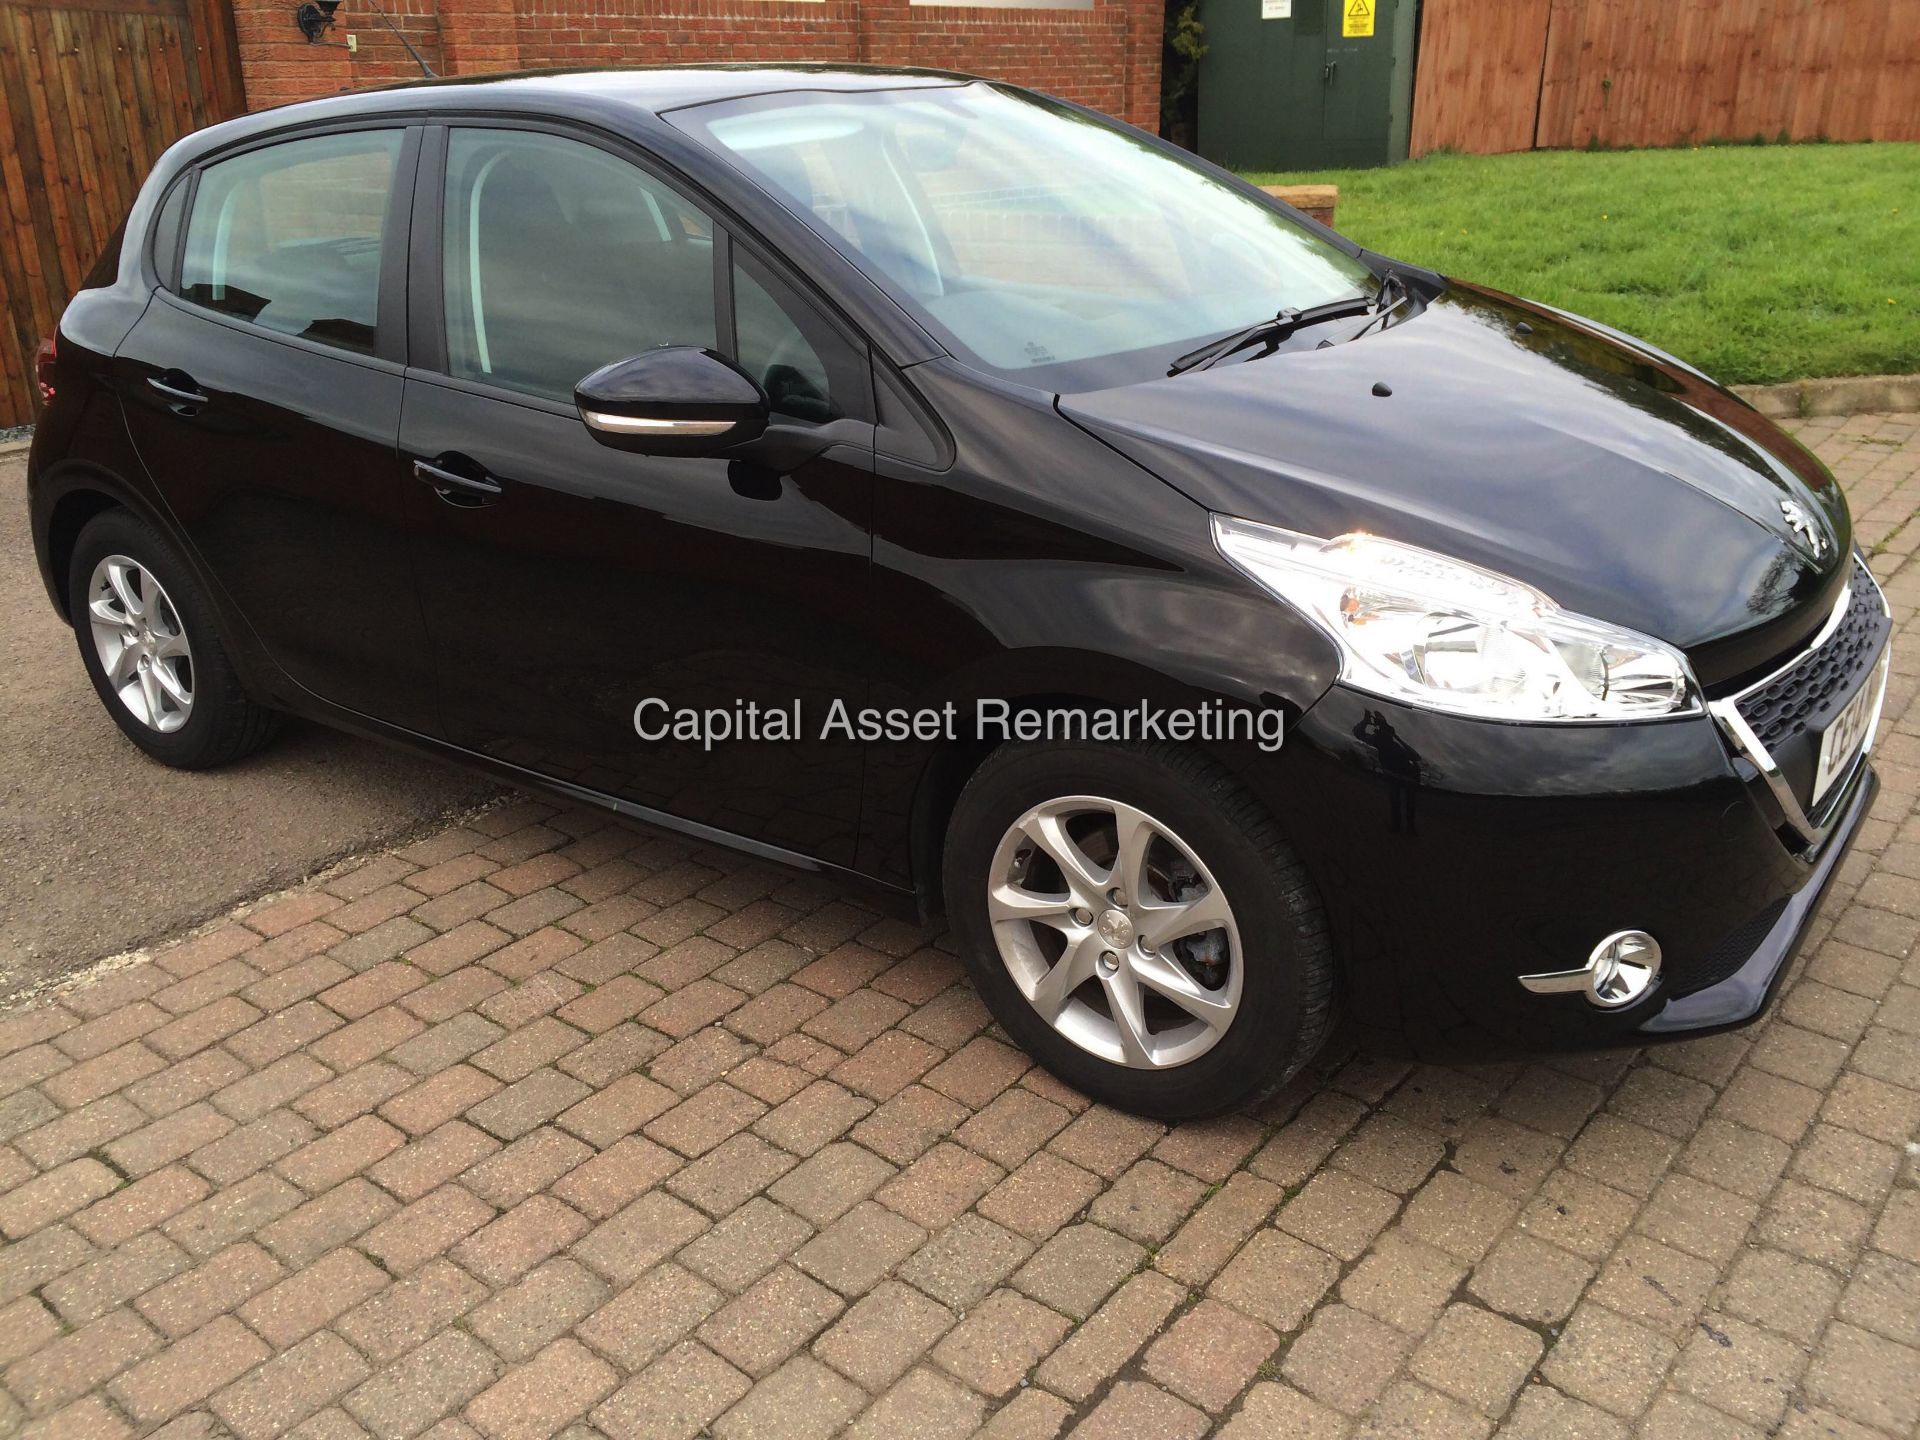 PEUGEOT 208 1.4 HDI 'ACTIVE' 5 DOOR (2014 - 14 REG)  **OWNED BY PEUGEOT FROM NEW**